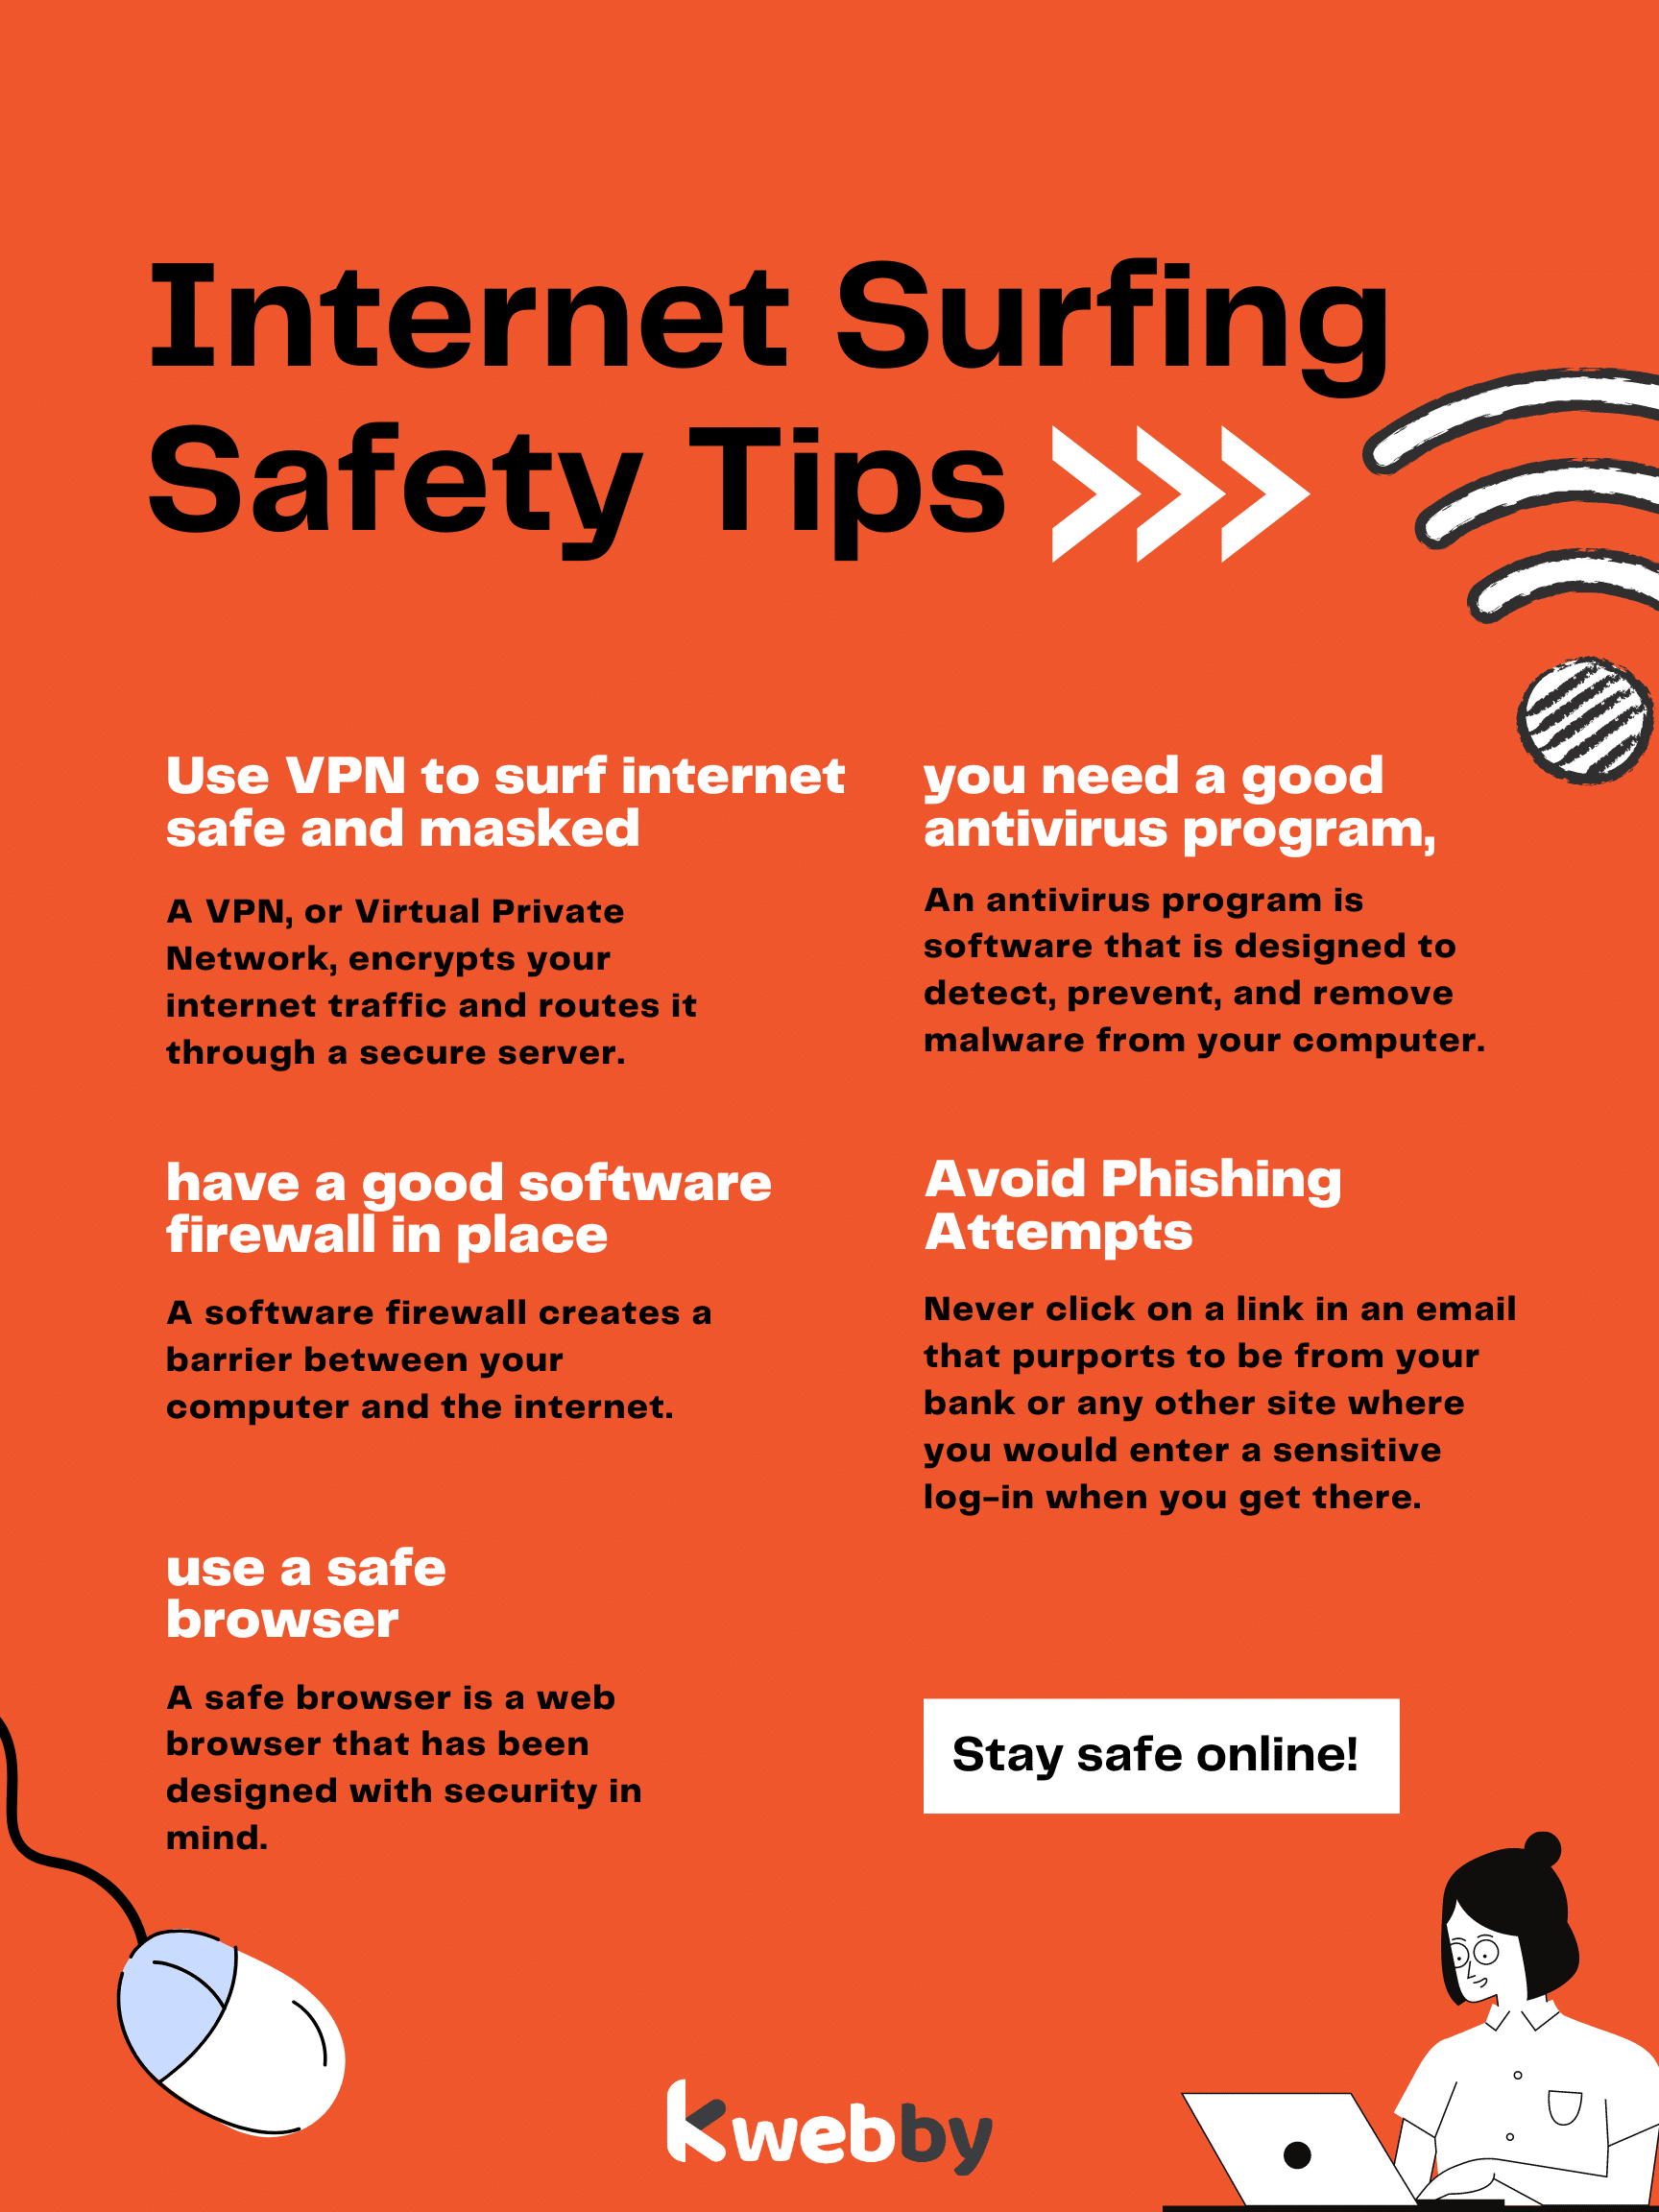 How to Surf the Internet Safely: Protect Your Privacy and Computer 1